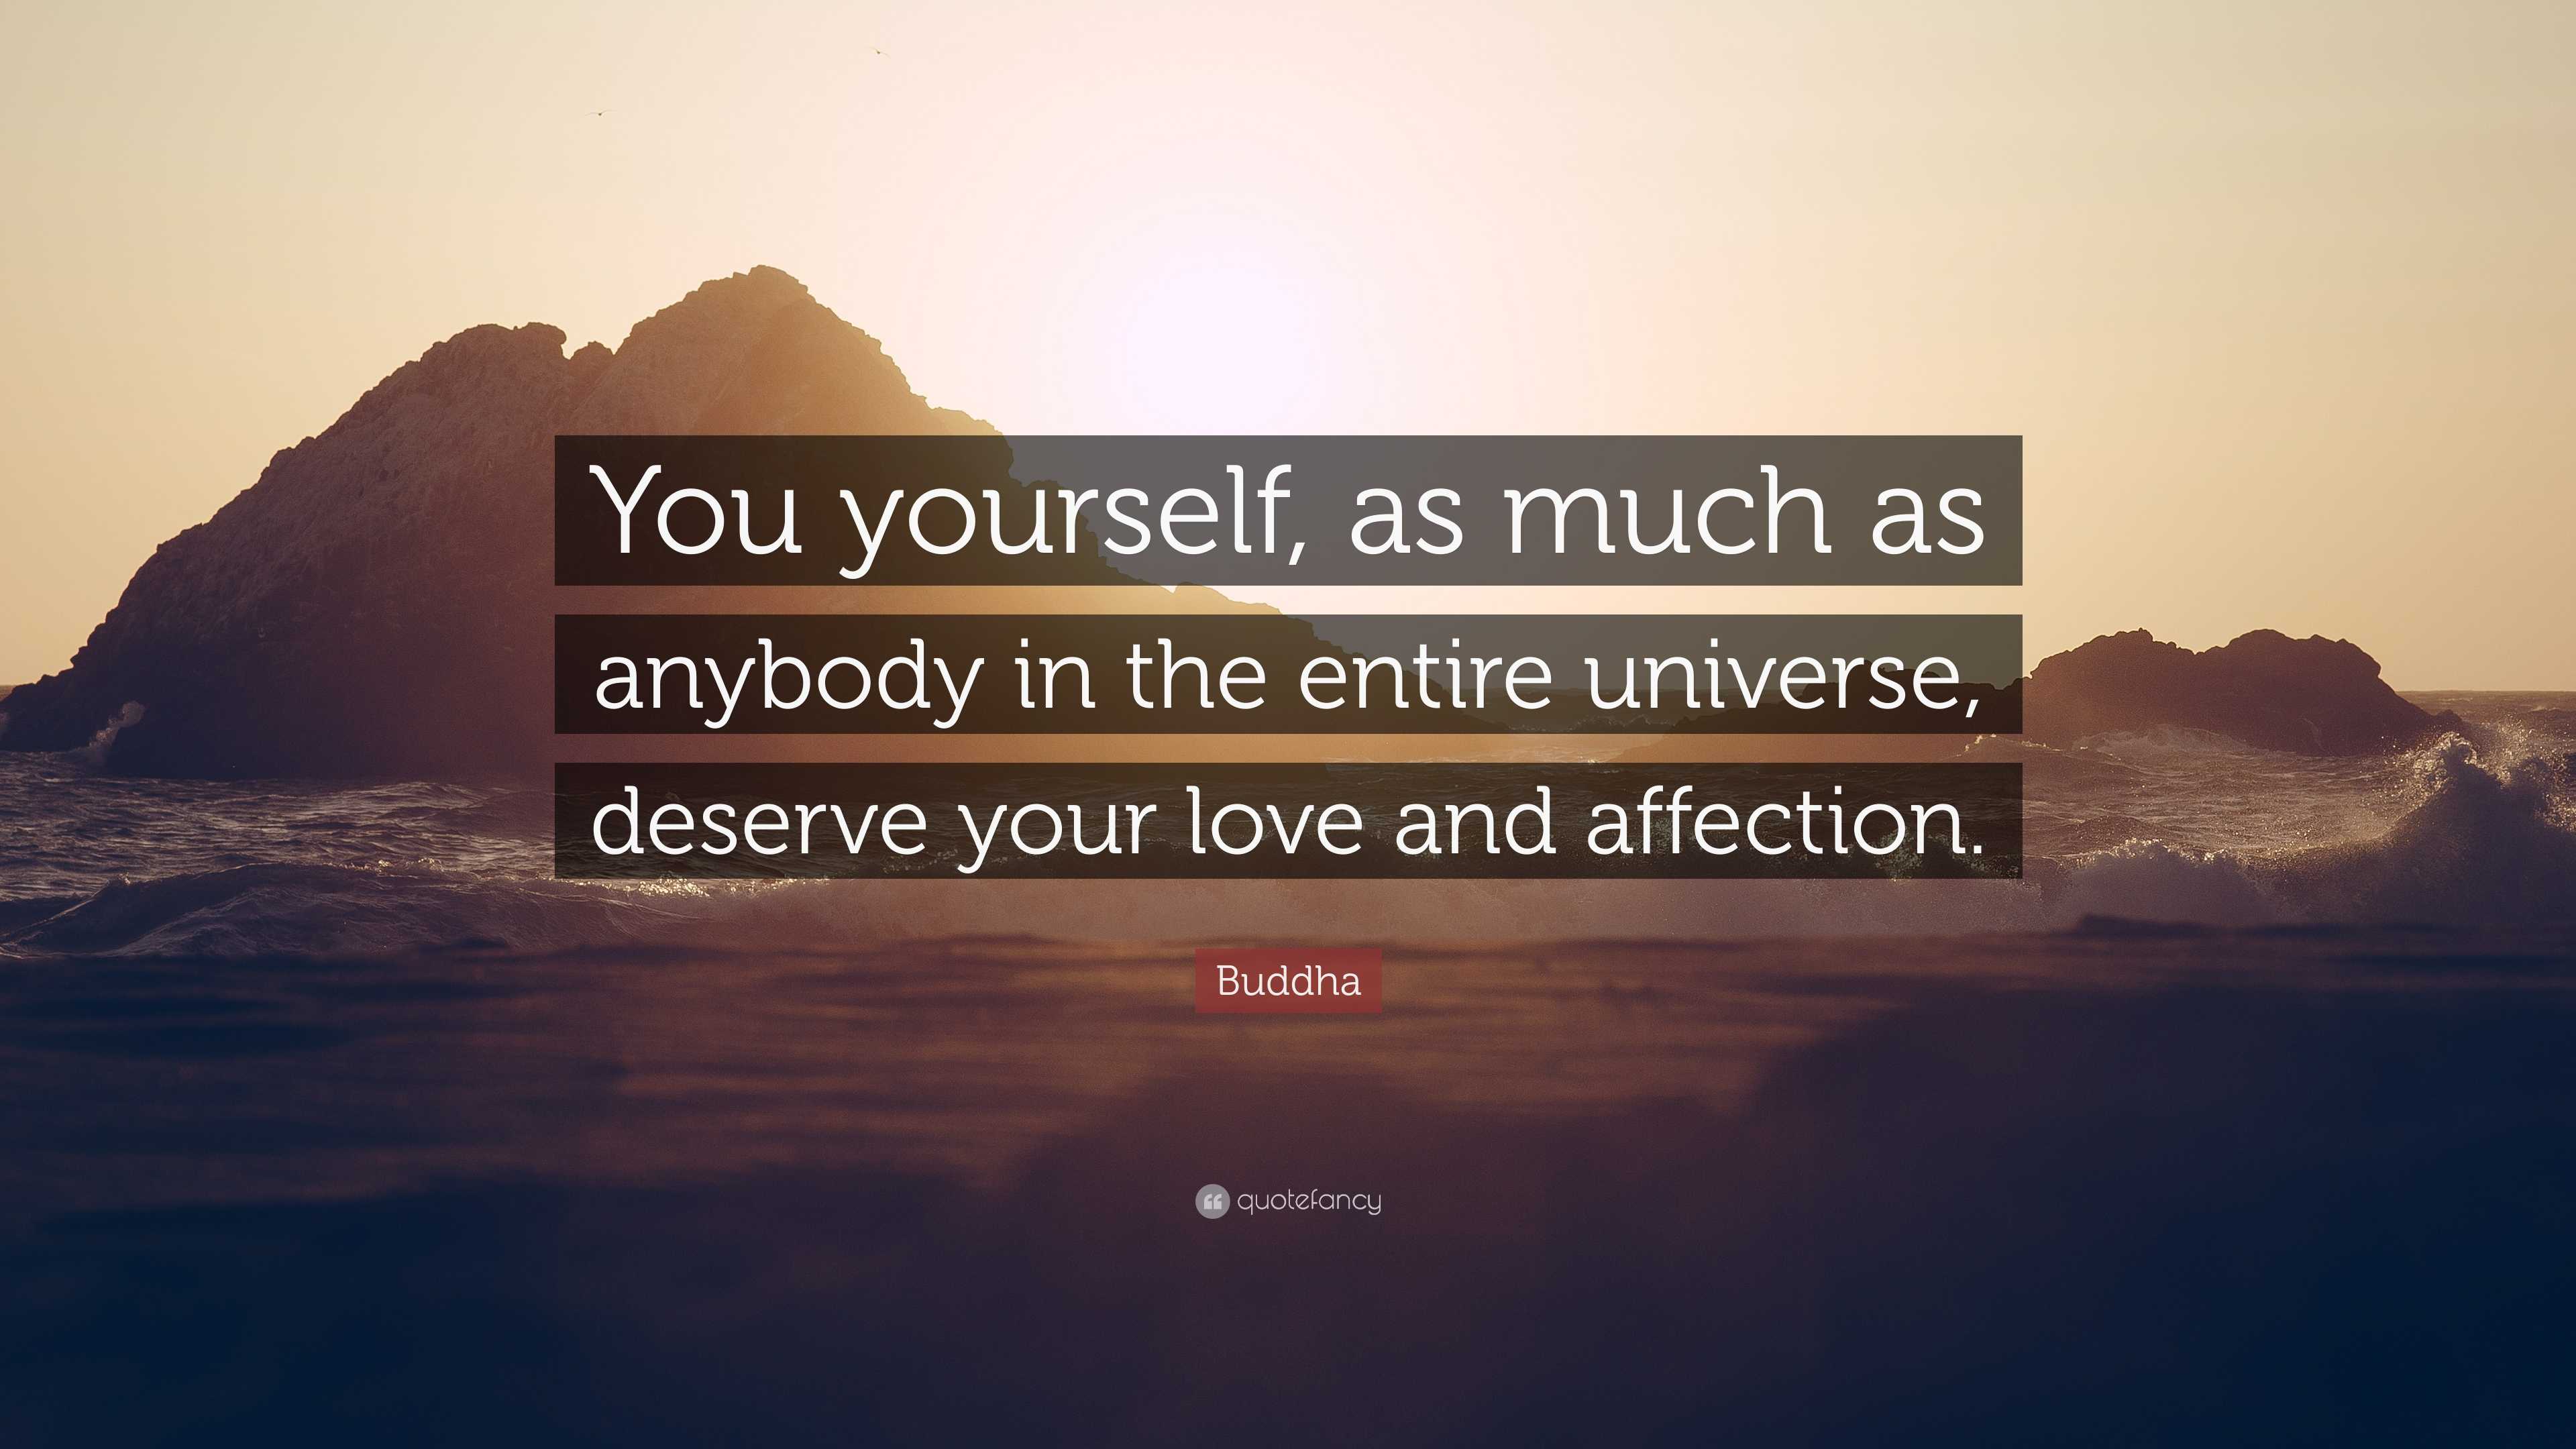 Buddha Quote: “You yourself, as much as anybody in the entire universe ...